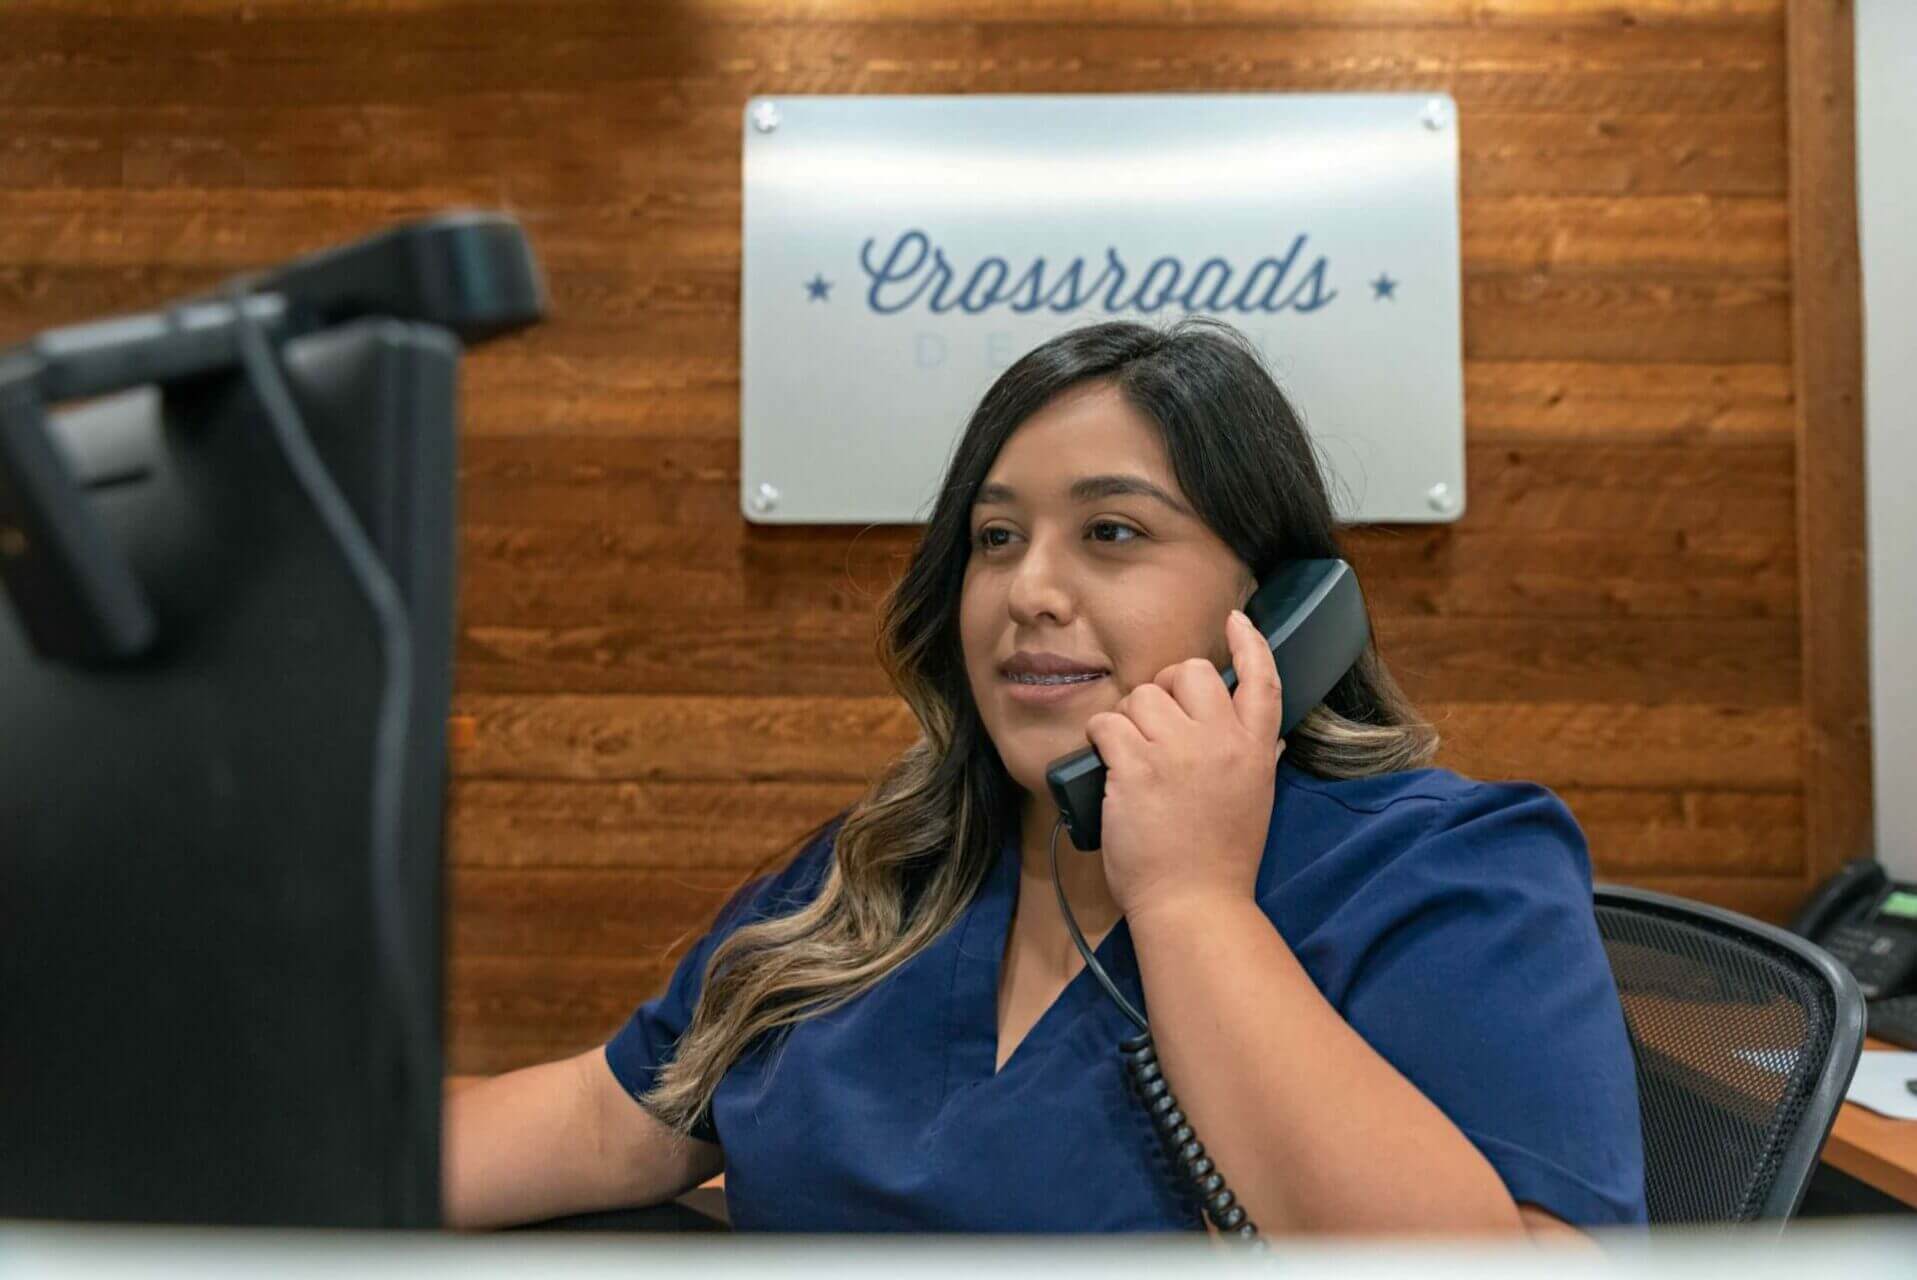 Crossroads Front Desk answering phone in Luling